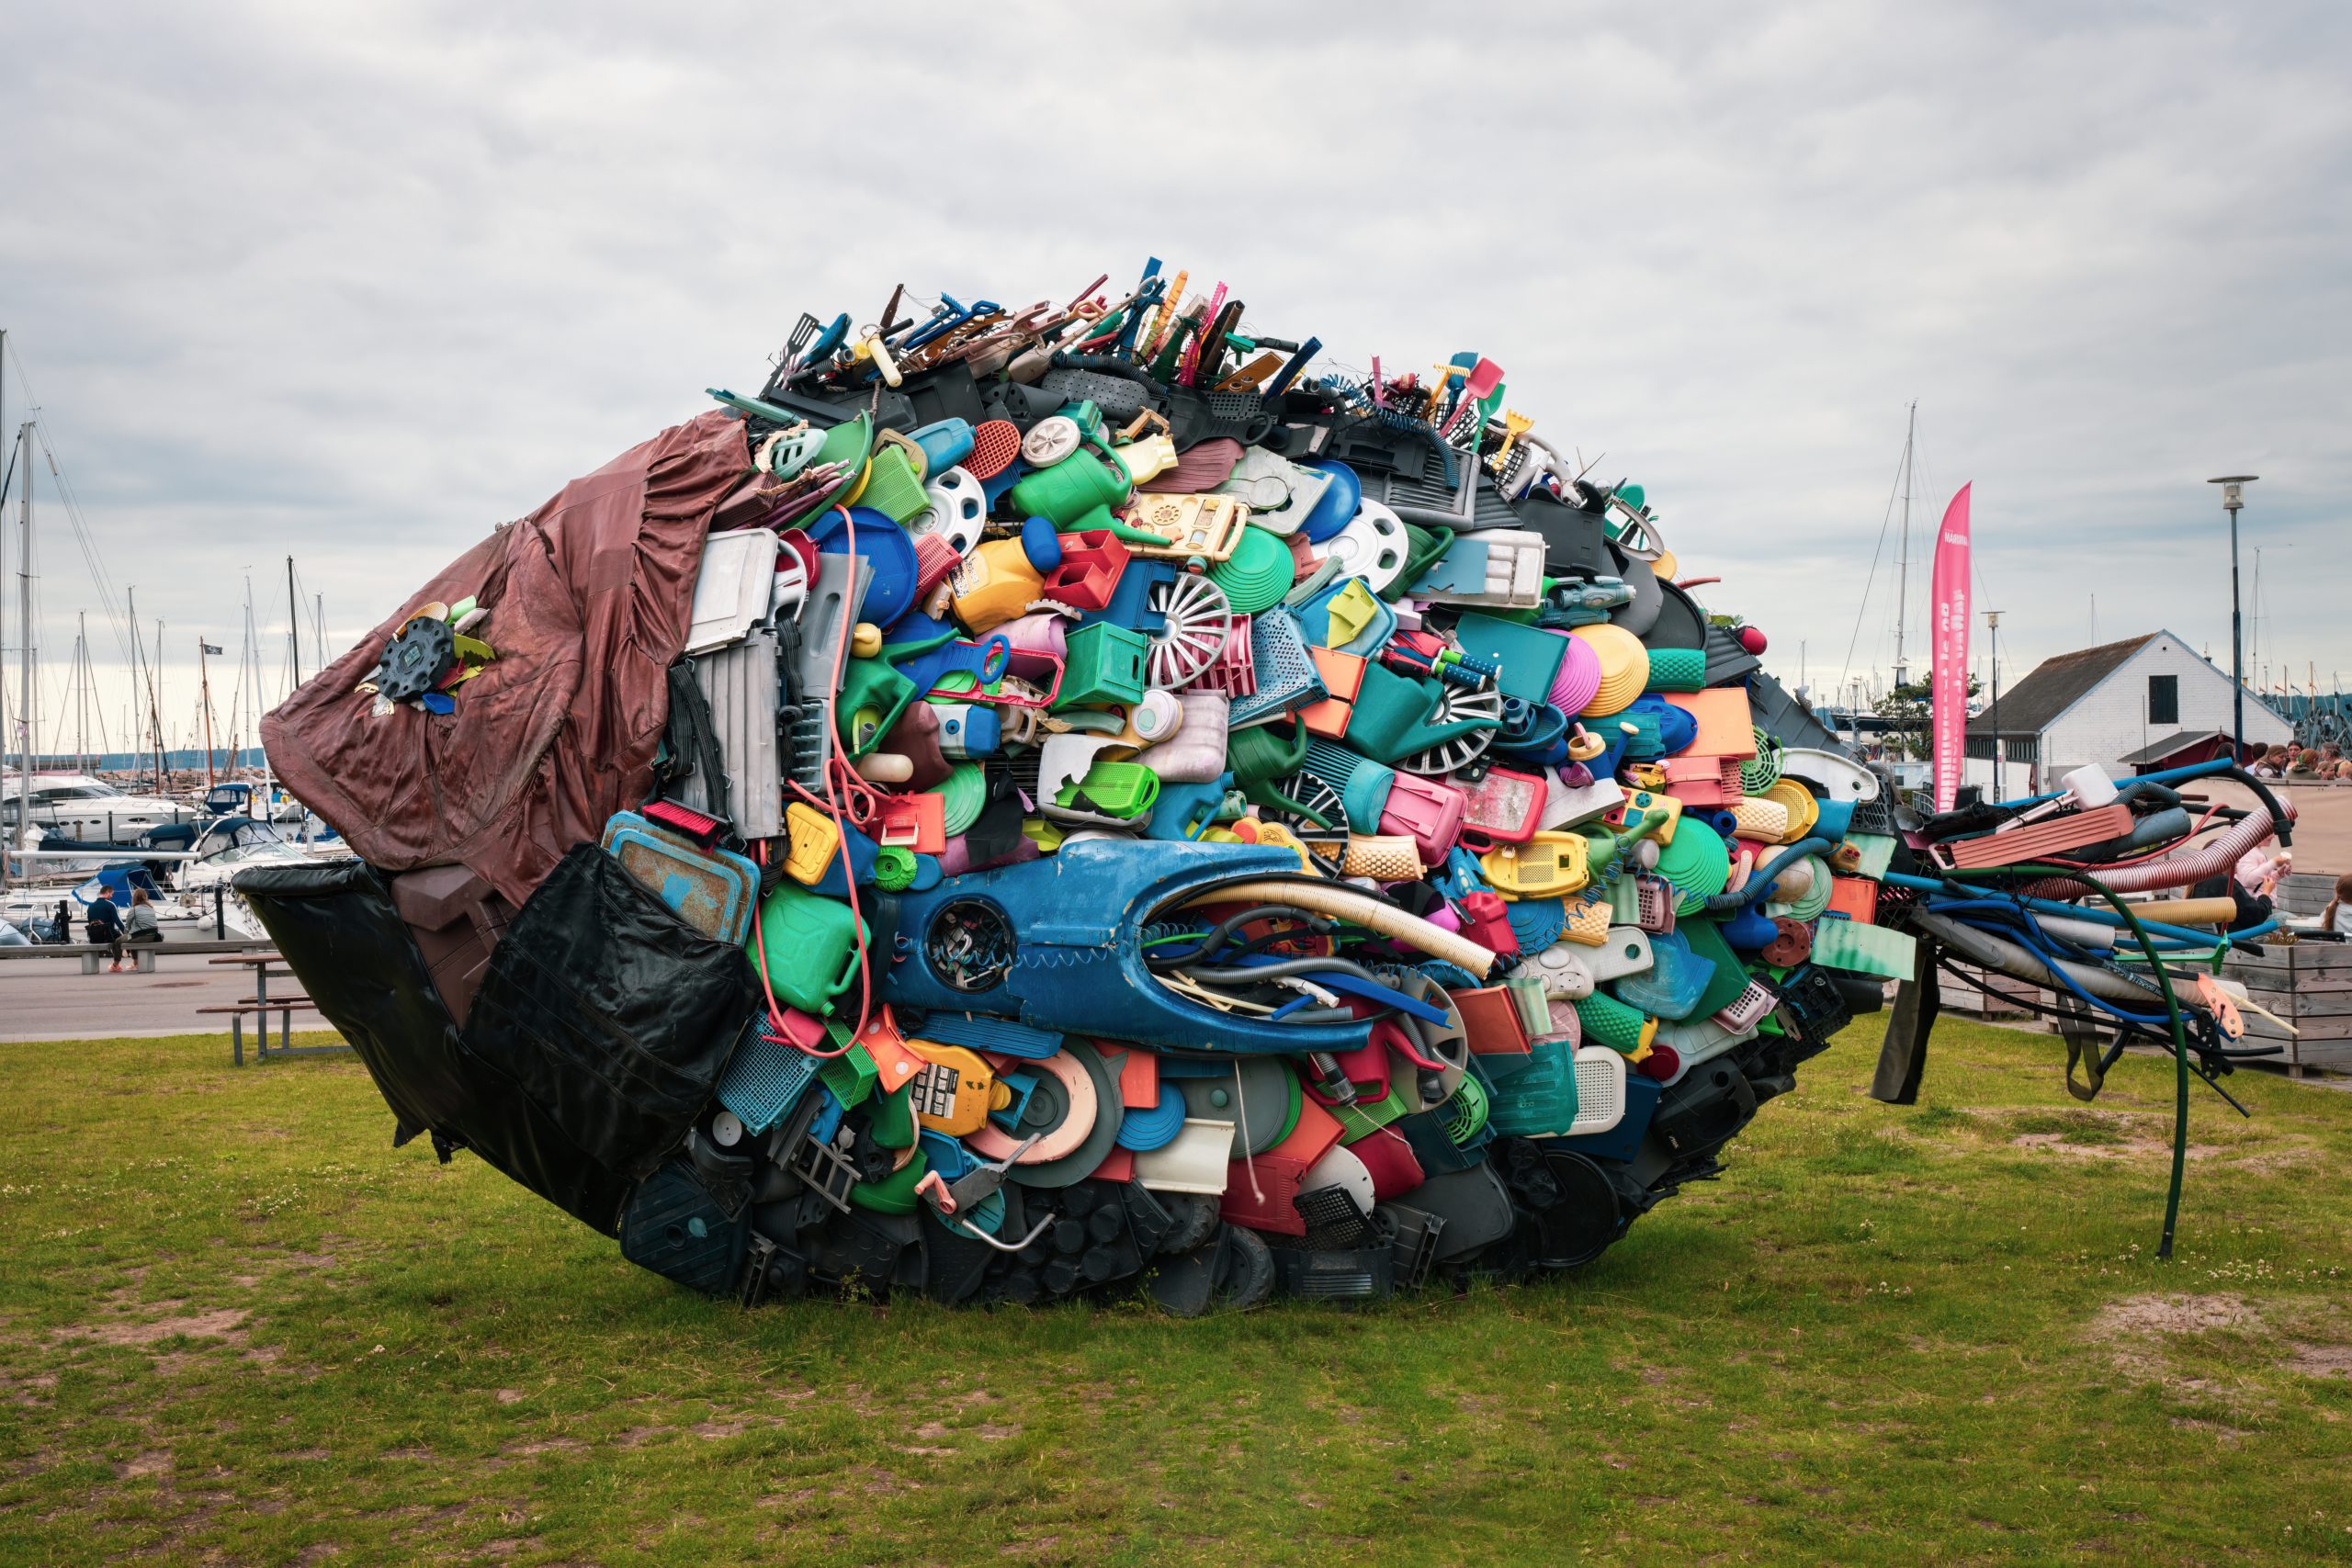 fish sculpture made from recycled waste